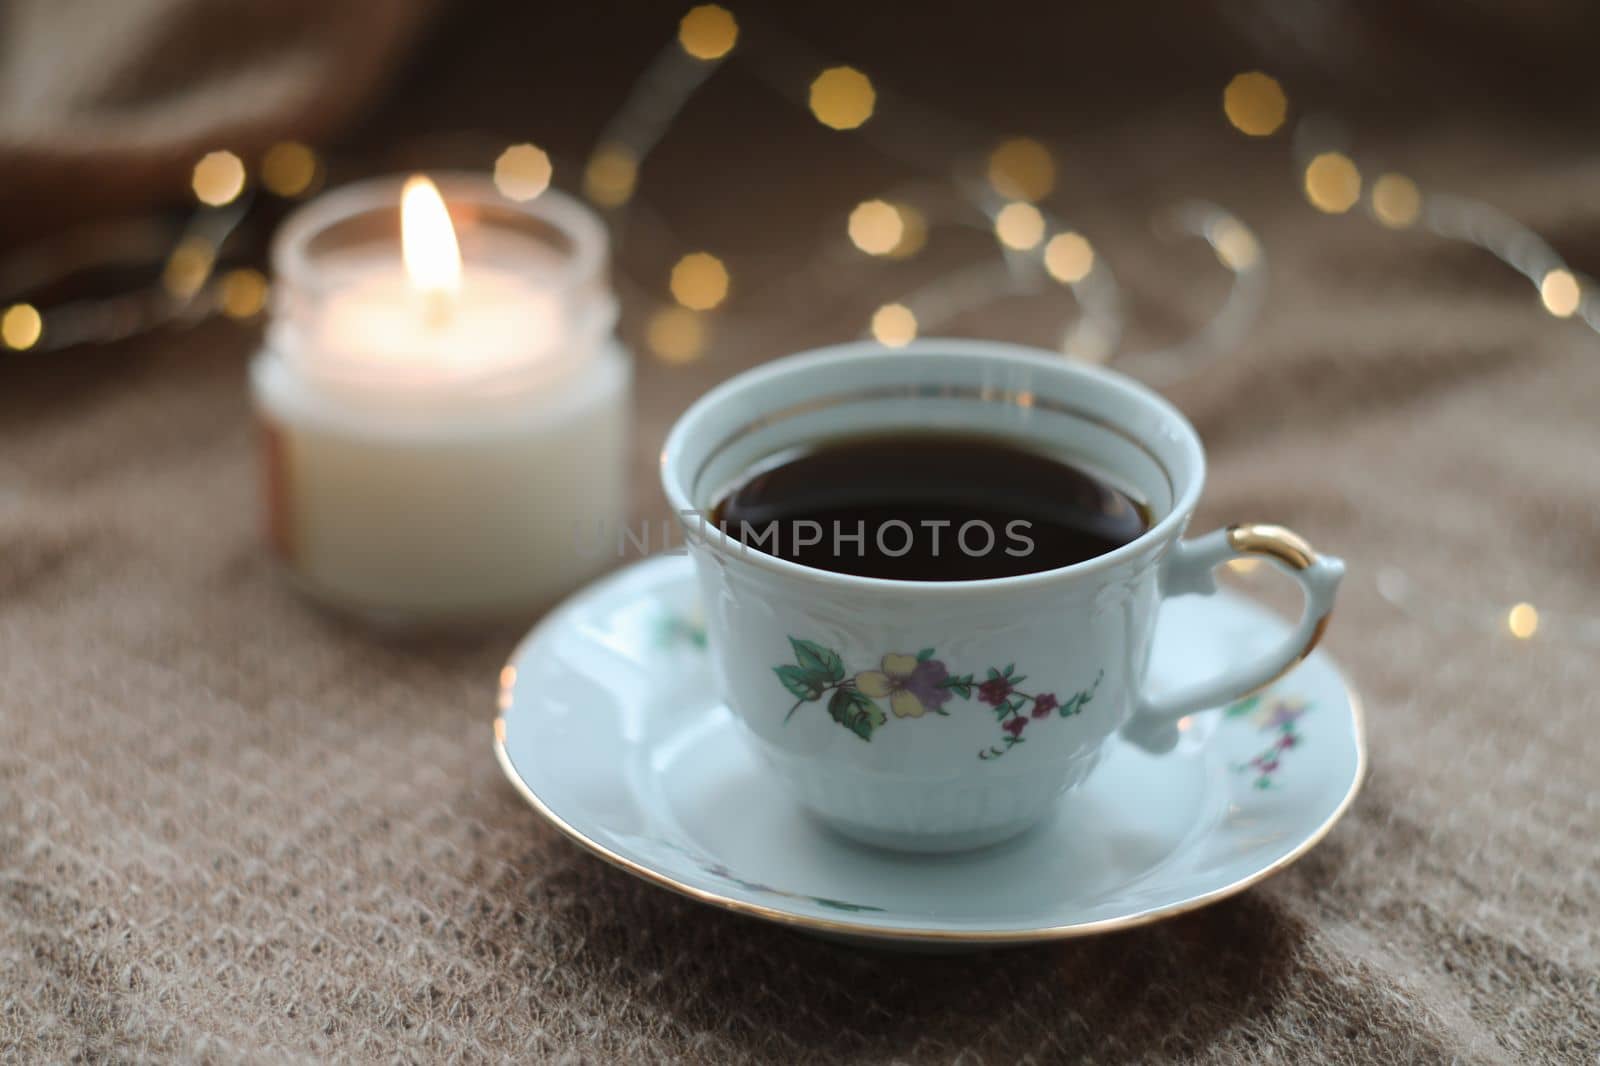 Details of still life in home interior of living room. Sweater, cup of tea, cotton, cozy, candle. Mug, candles and a garland bokeh on a dark cozy background. Decoration, vintage with glow bokeh